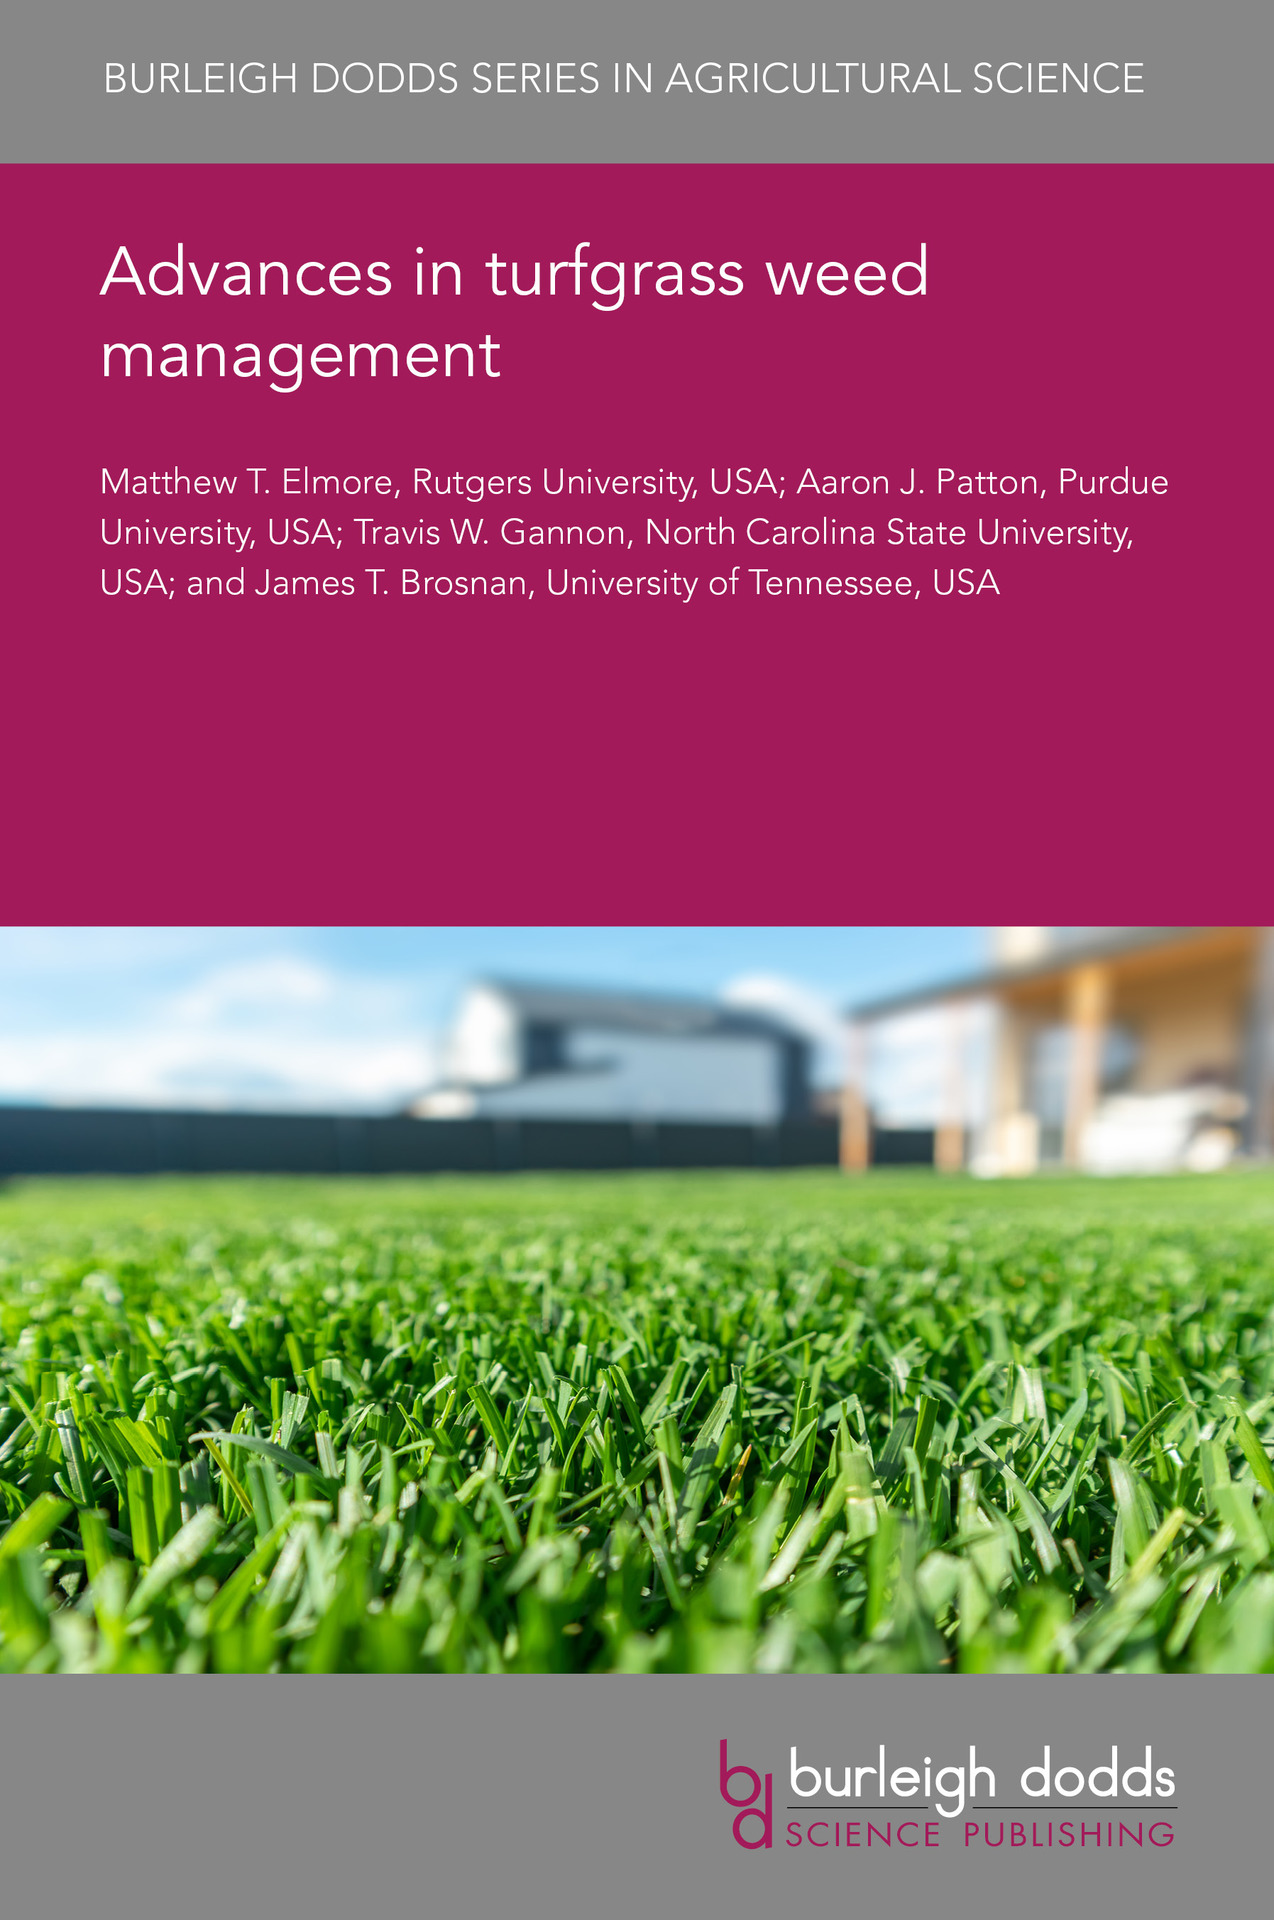 Advances in turfgrass weed management